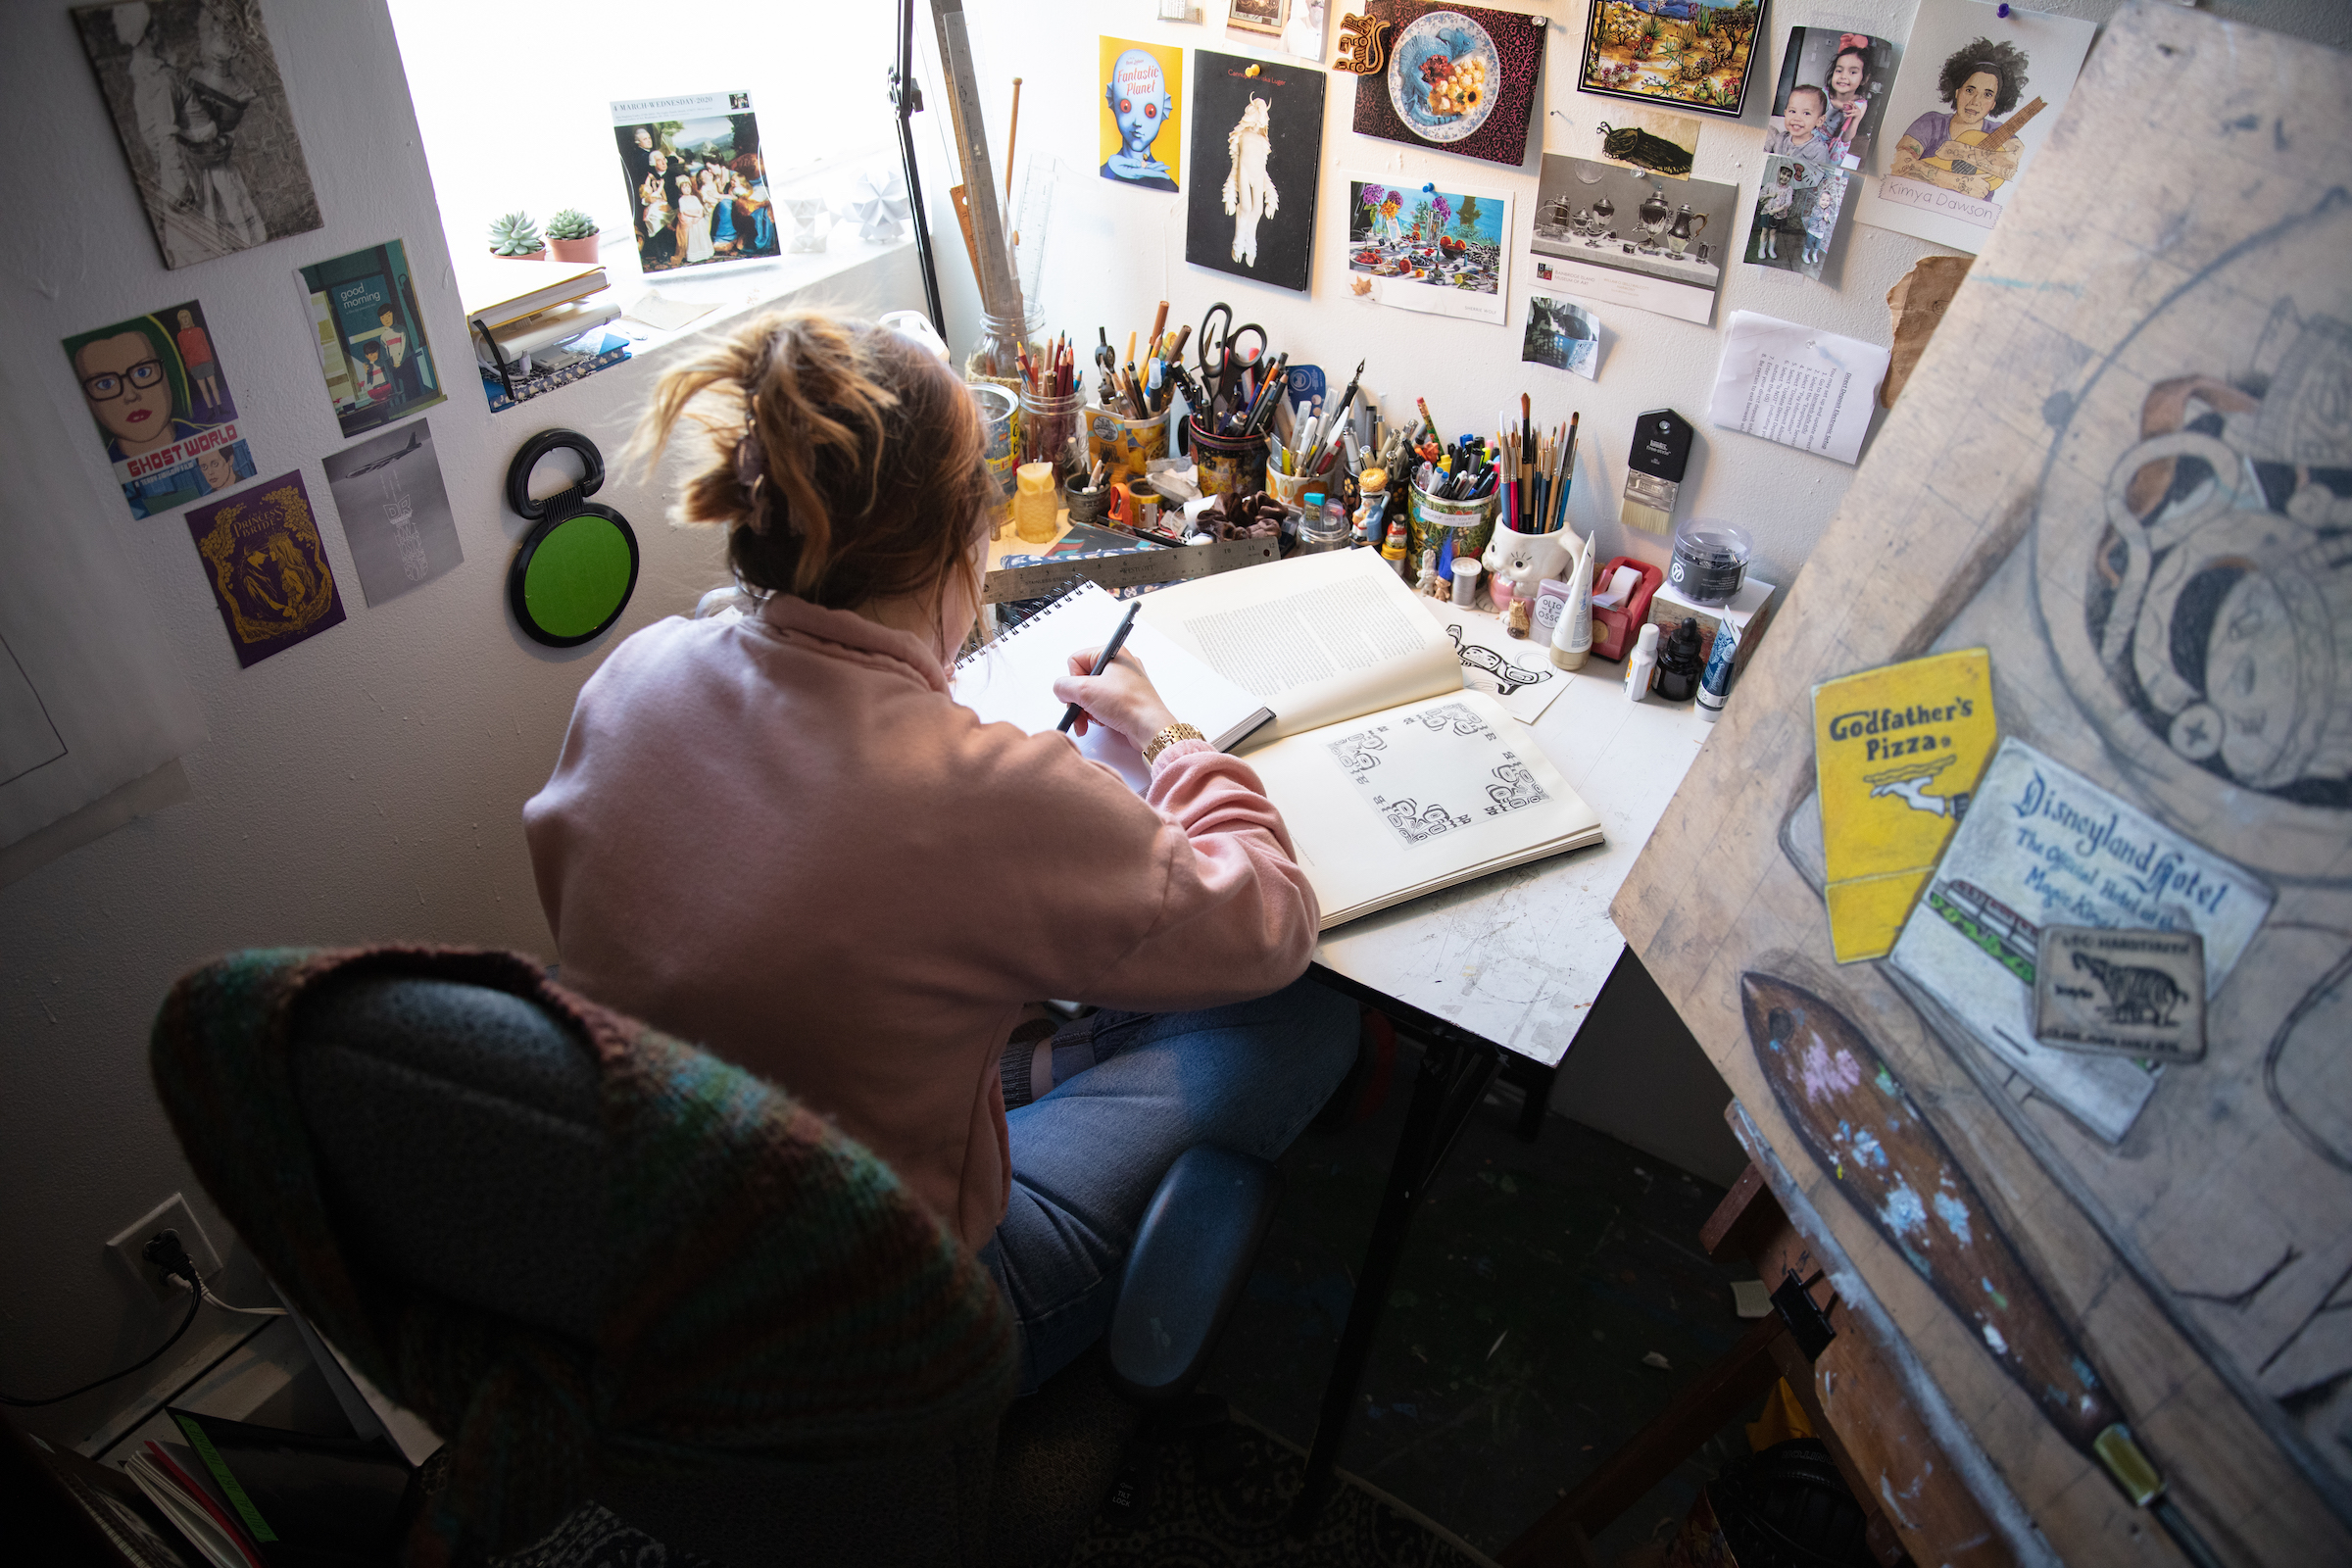 Graduate student working at a drawing table by a window, surrounded by reference images and art supplies